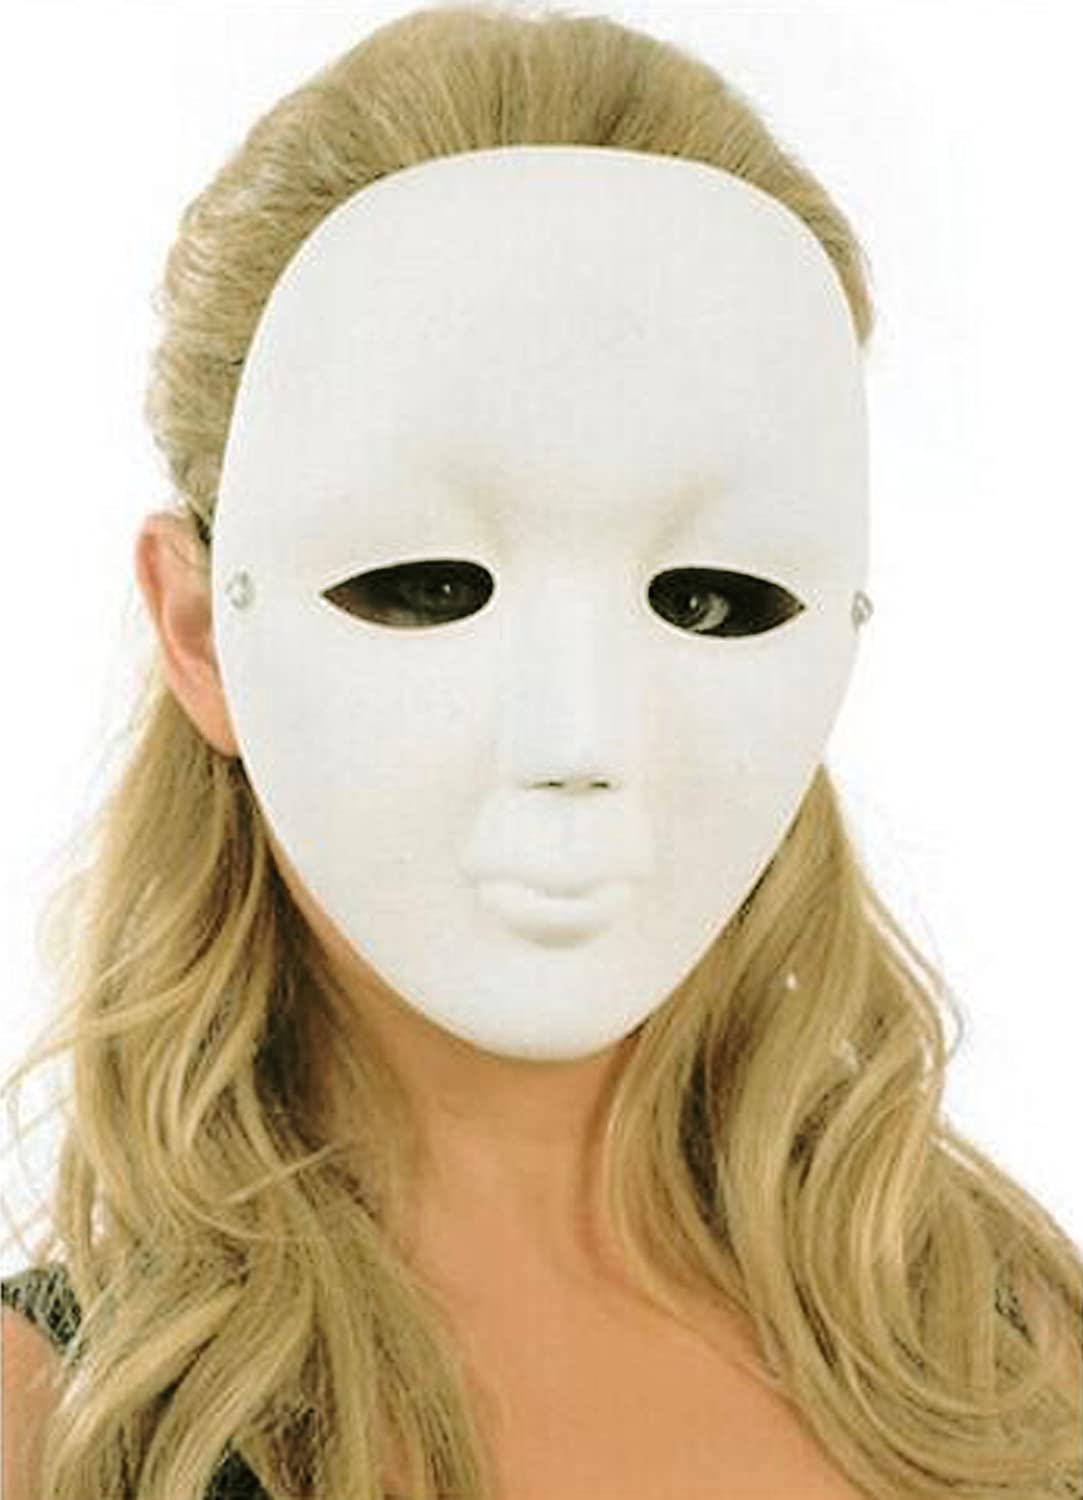 Plastic White Masks for Crafts and Party, Pack of 5 Masks, Standard Size